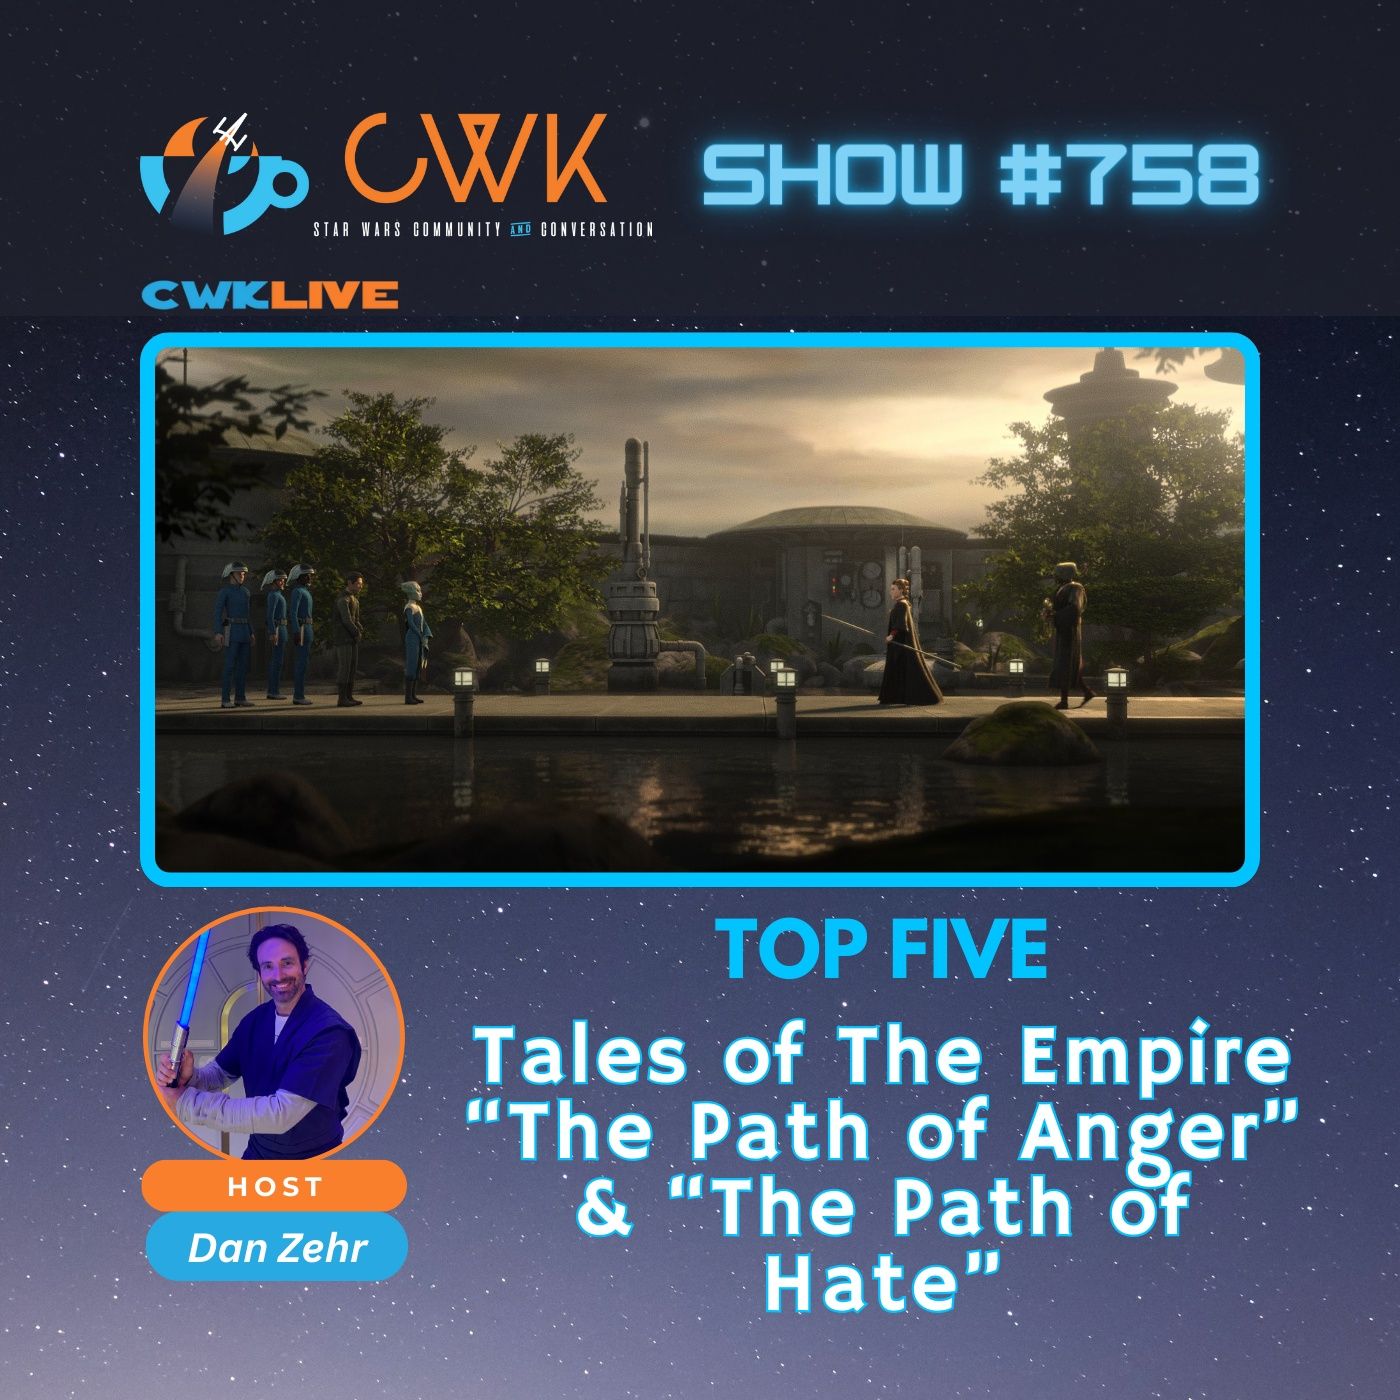 CWK Show #758 LIVE: Top Five Moments from Tales of The Empire ”The Path of Anger” & ”The Path of Hate”